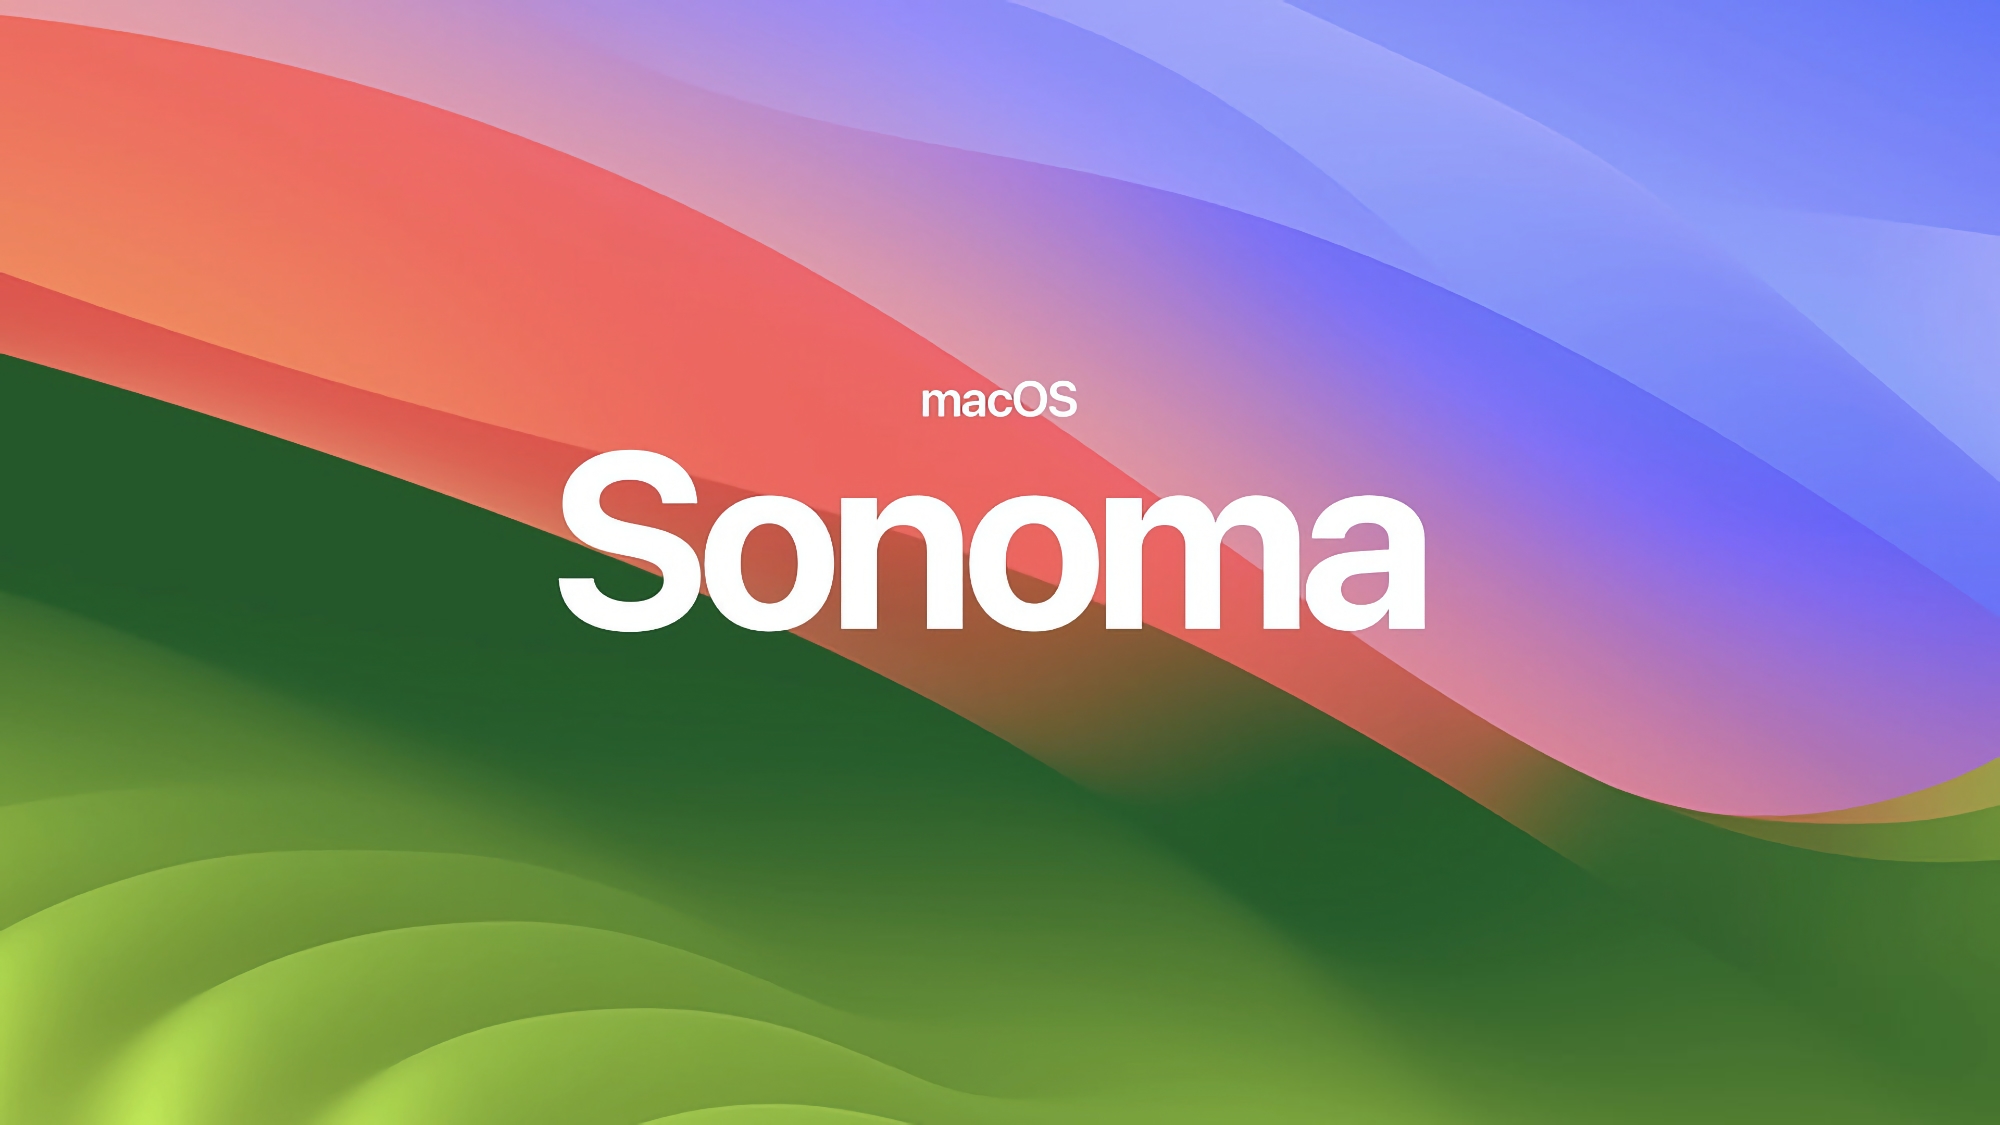 For developers: Apple has started testing macOS Sonoma 14.6 Beta 3